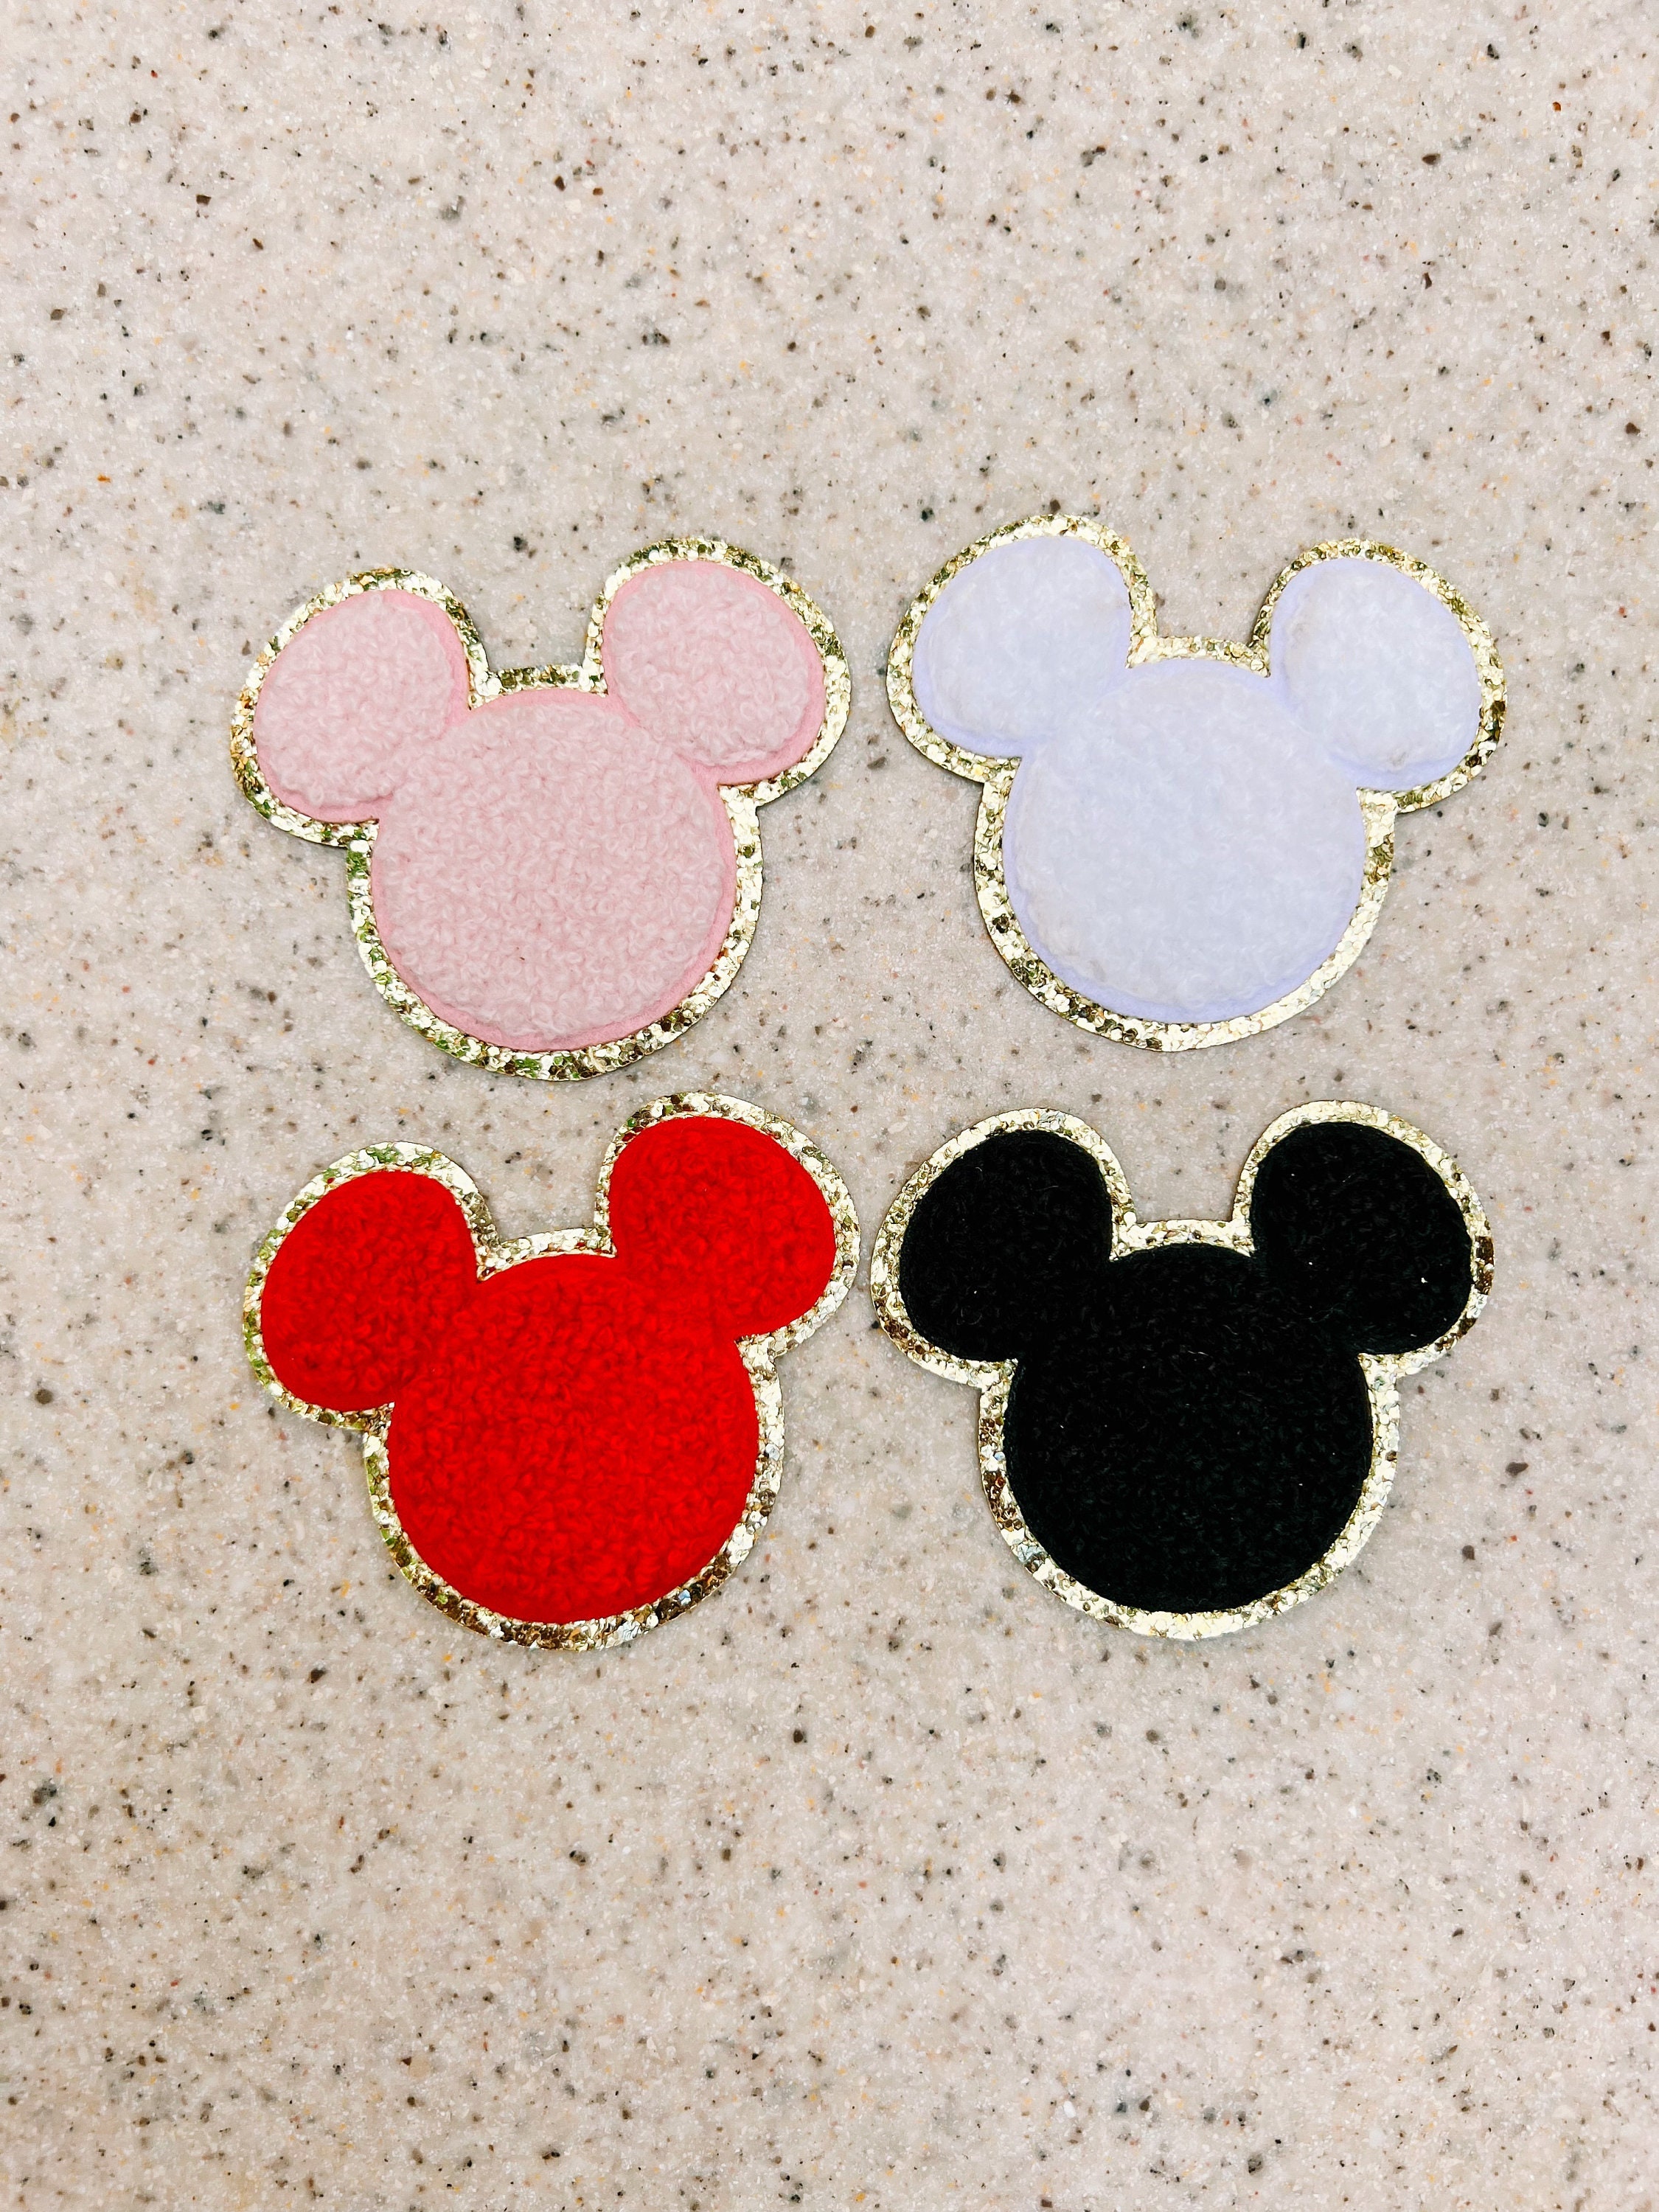 Disney © Mickey Mouse Pluto - Iron On Patches Adhesive Emblem Stickers  Appliques, Size: 2,95 x 2,08 Inches